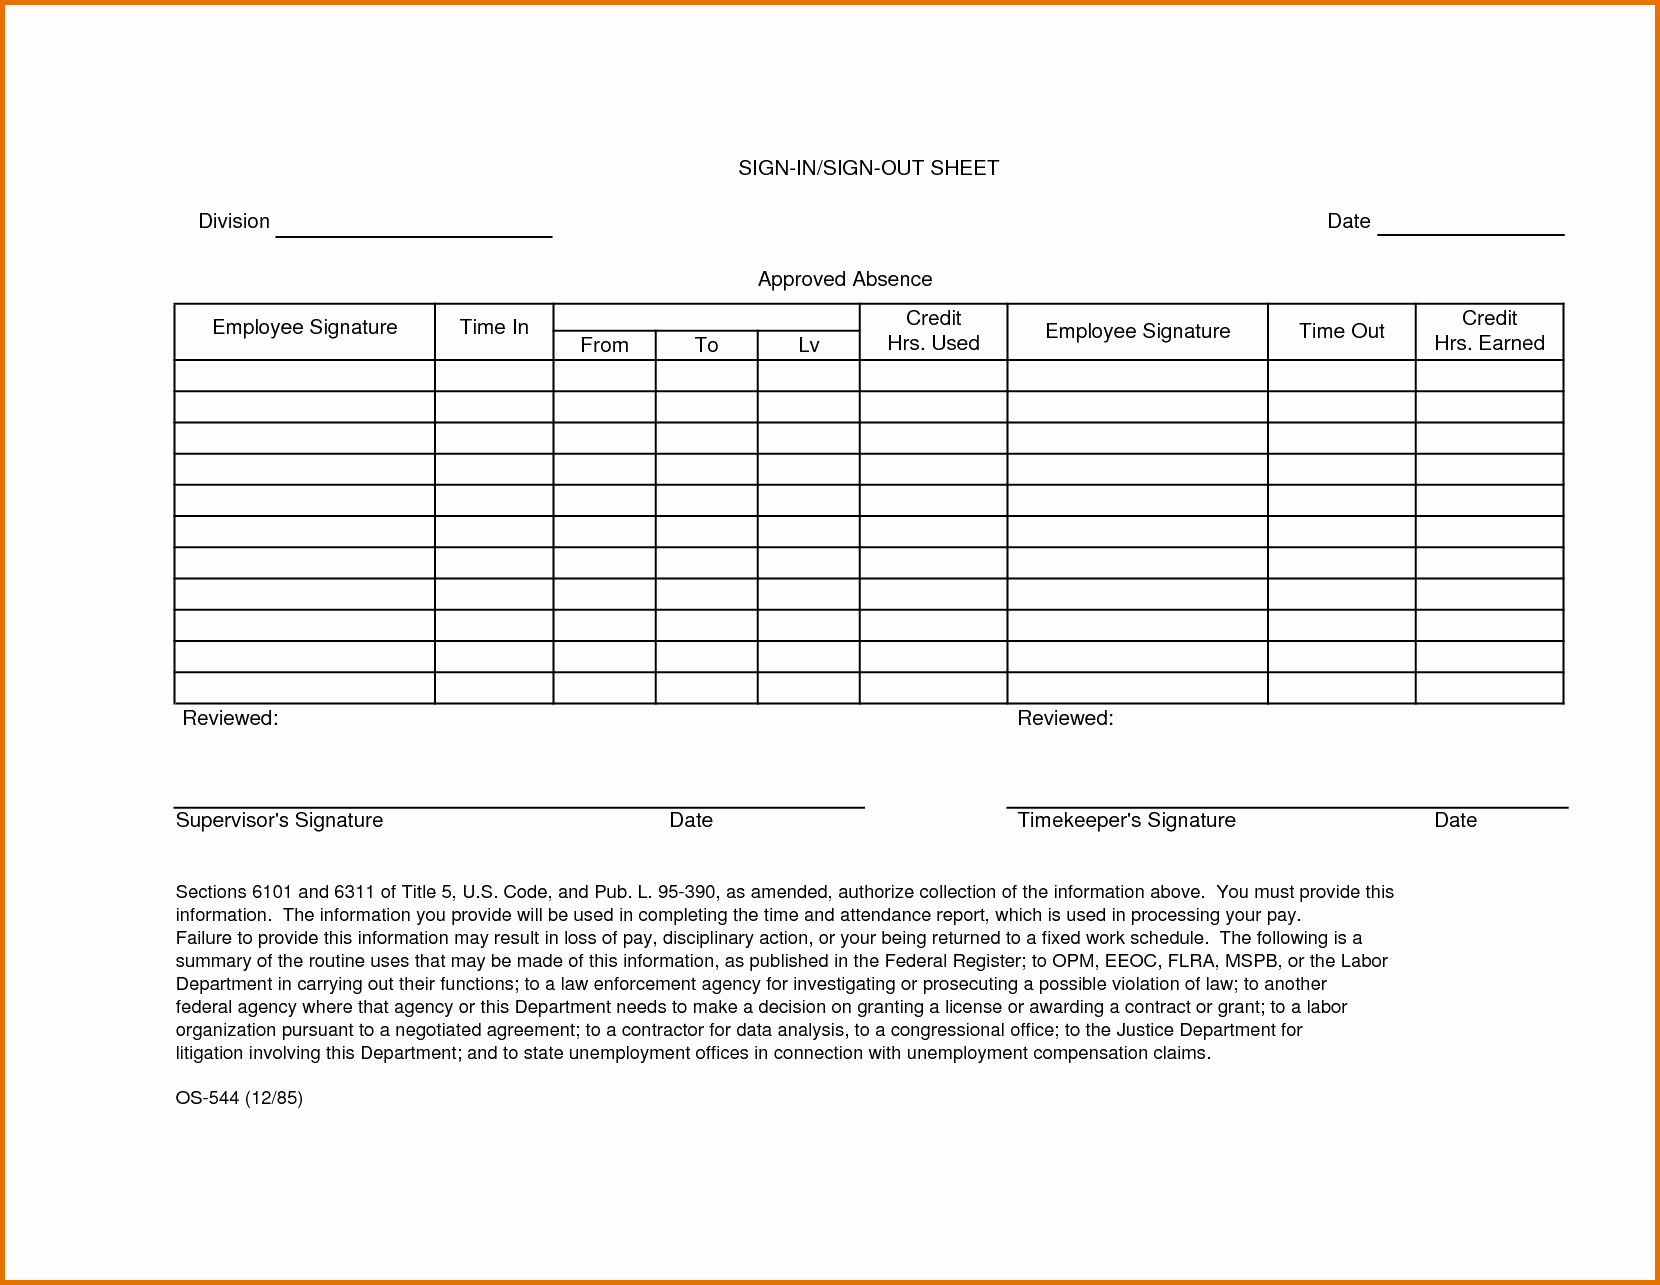 Employee Sign In Sheet Template Elegant 8 Employee Sign In Sheetreference Letters Words